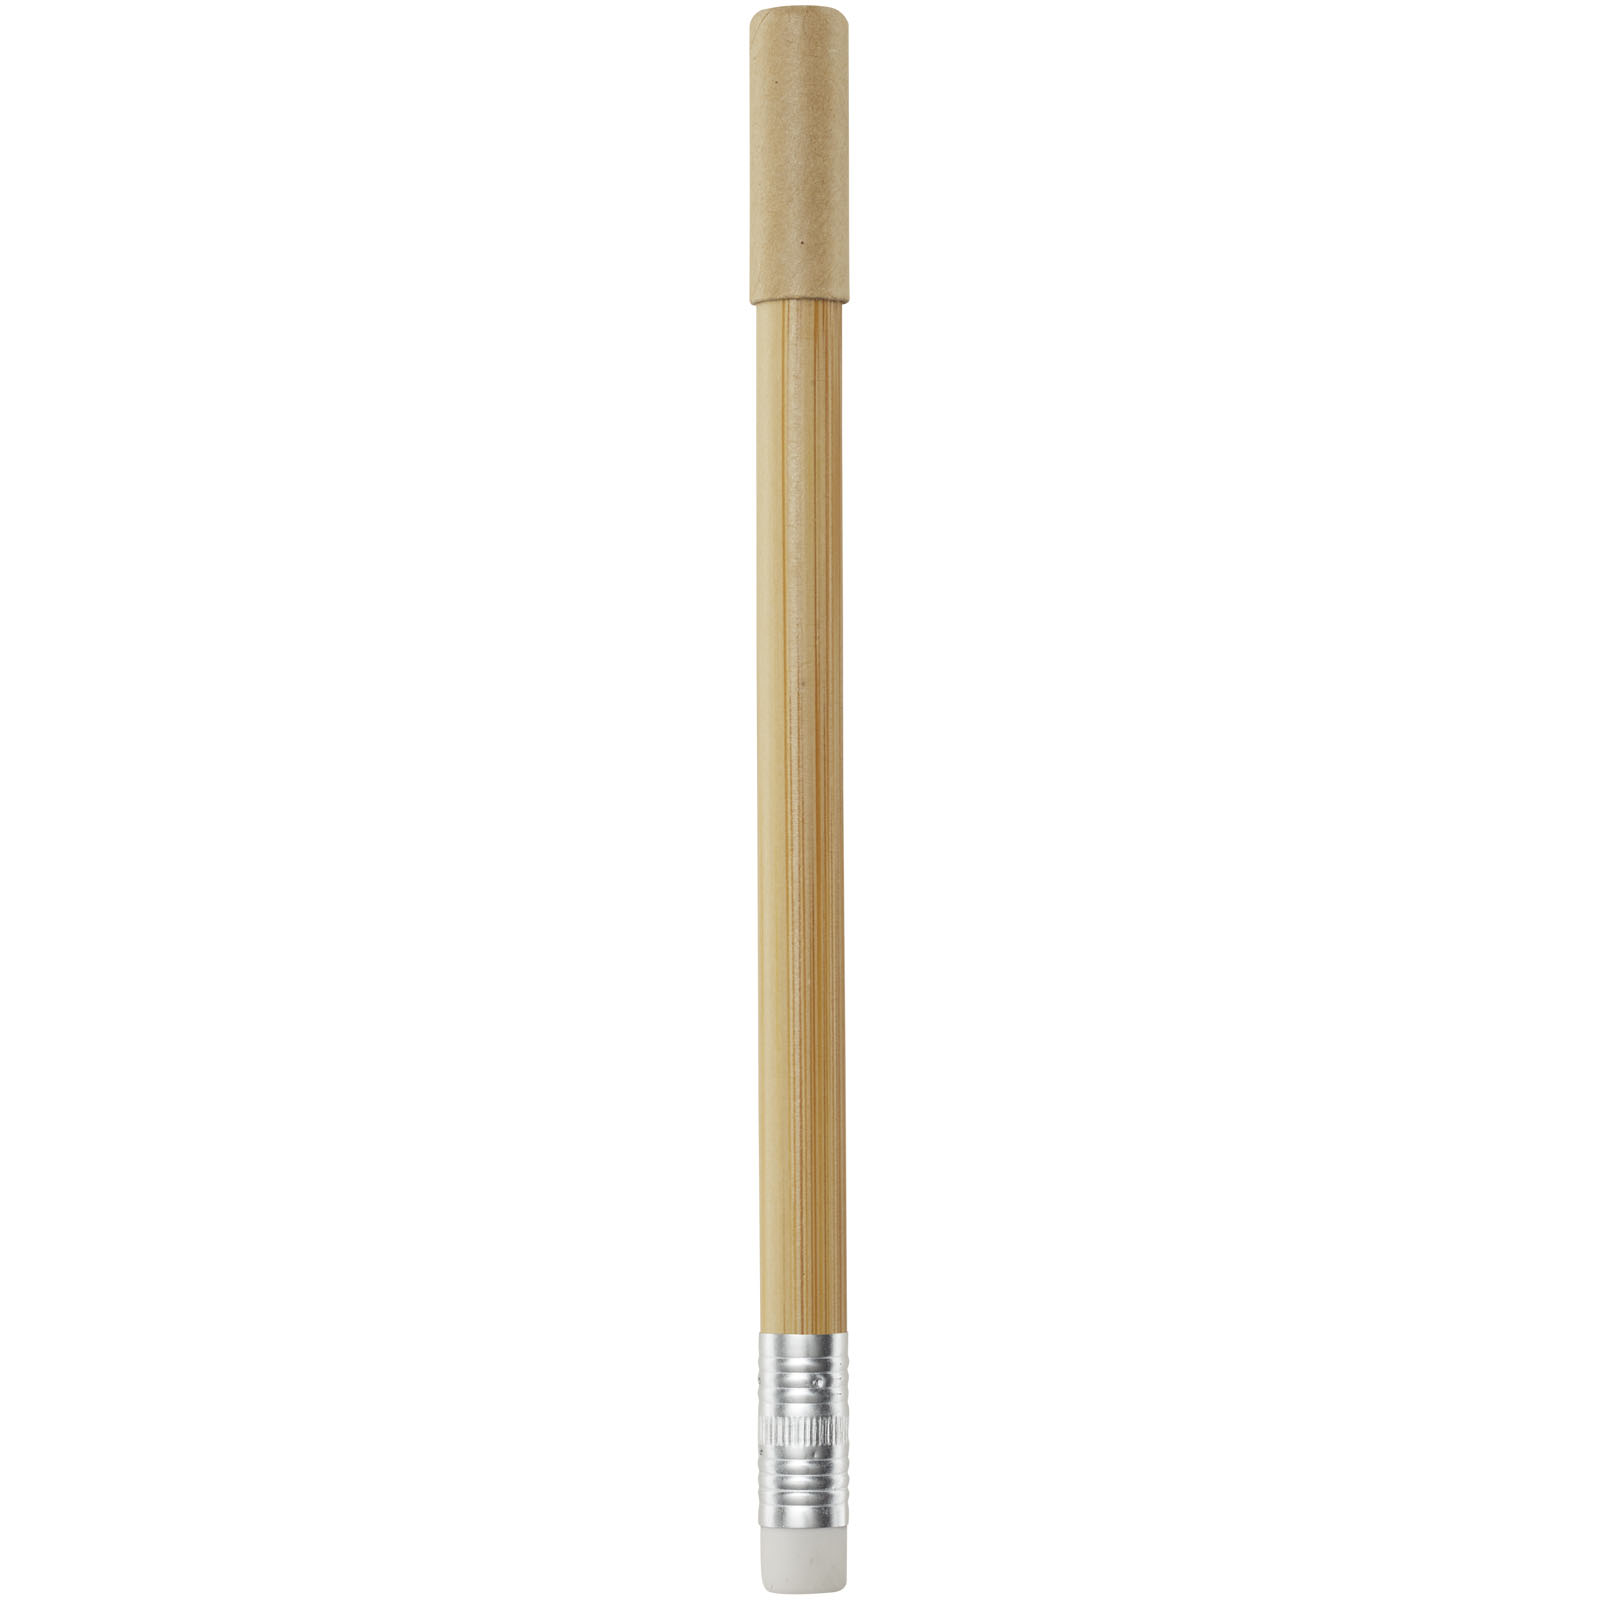 Other Pens & Writing Accessories - Krajono bamboo inkless pen 